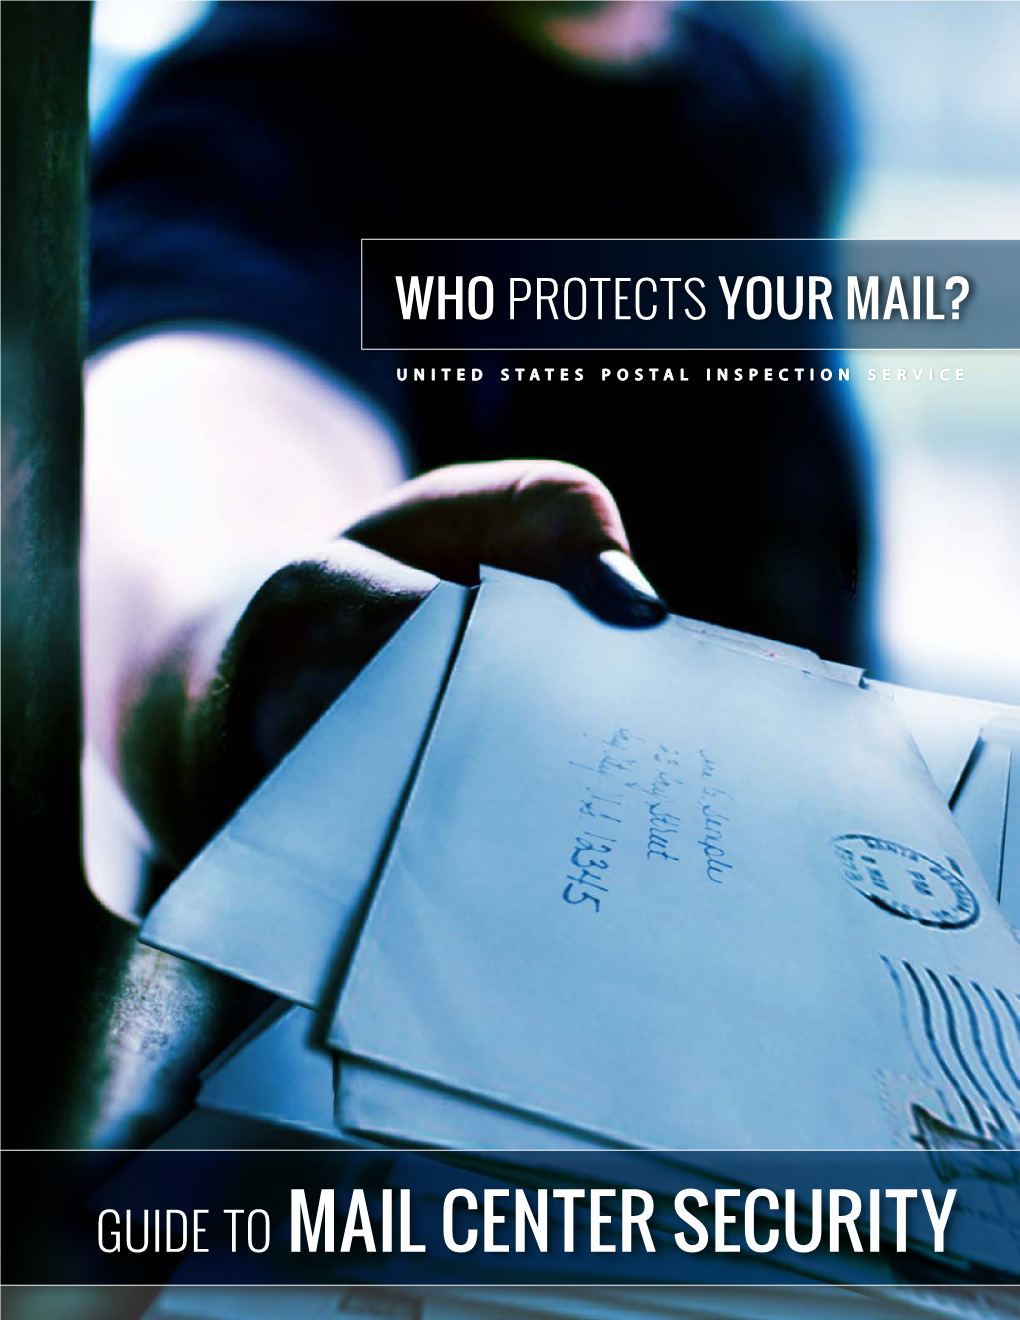 PUBLICATIONS ABOUT MAIL CENTER SECURITY These Publications from the U.S